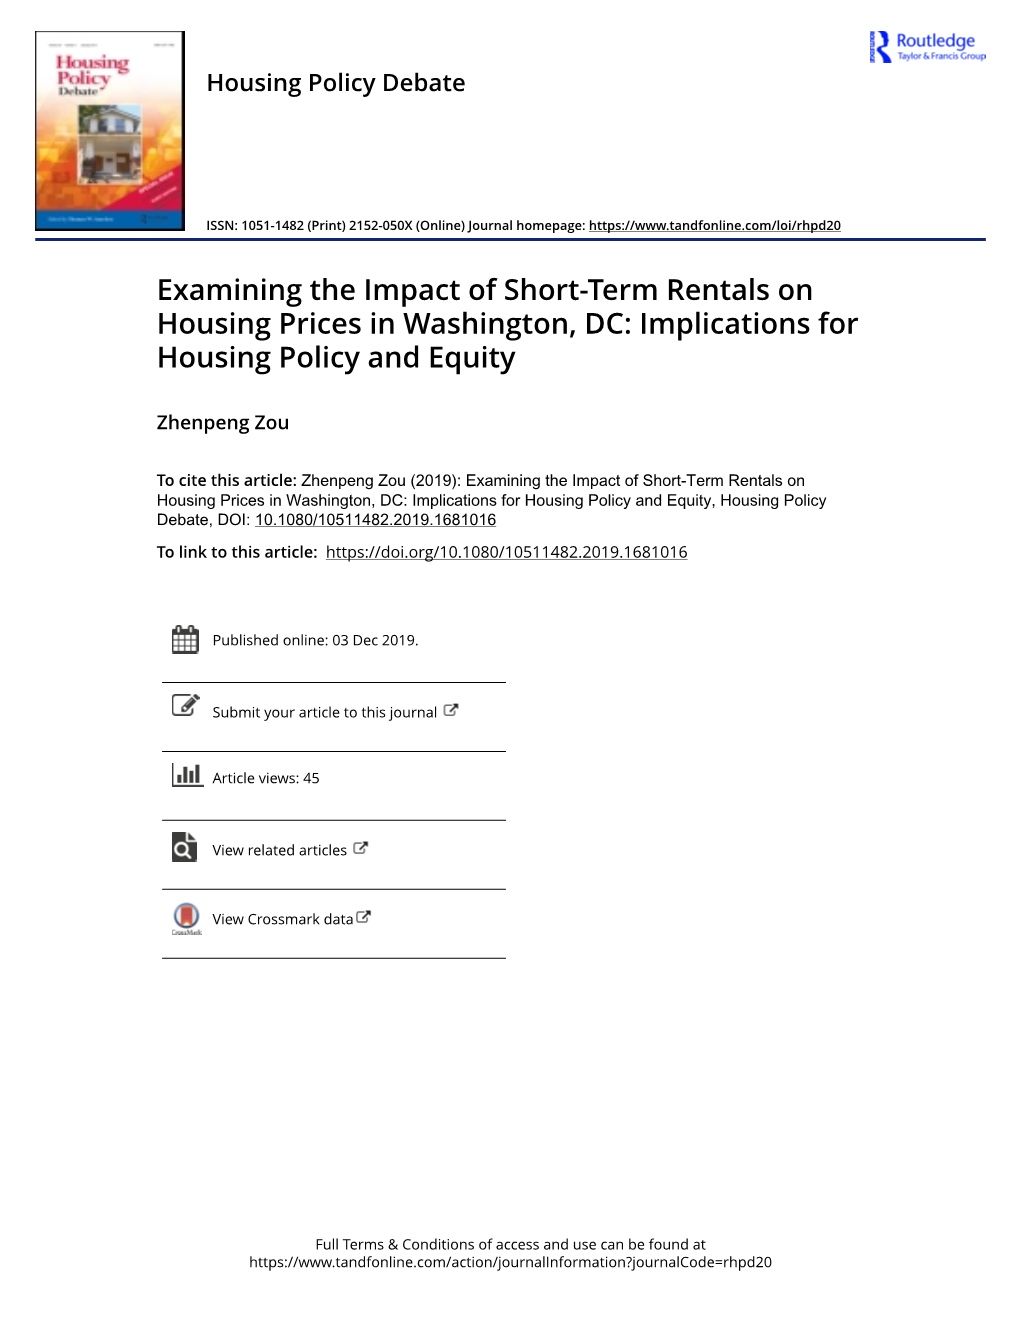 Examining the Impact of Short-Term Rentals on Housing Prices in Washington, DC: Implications for Housing Policy and Equity